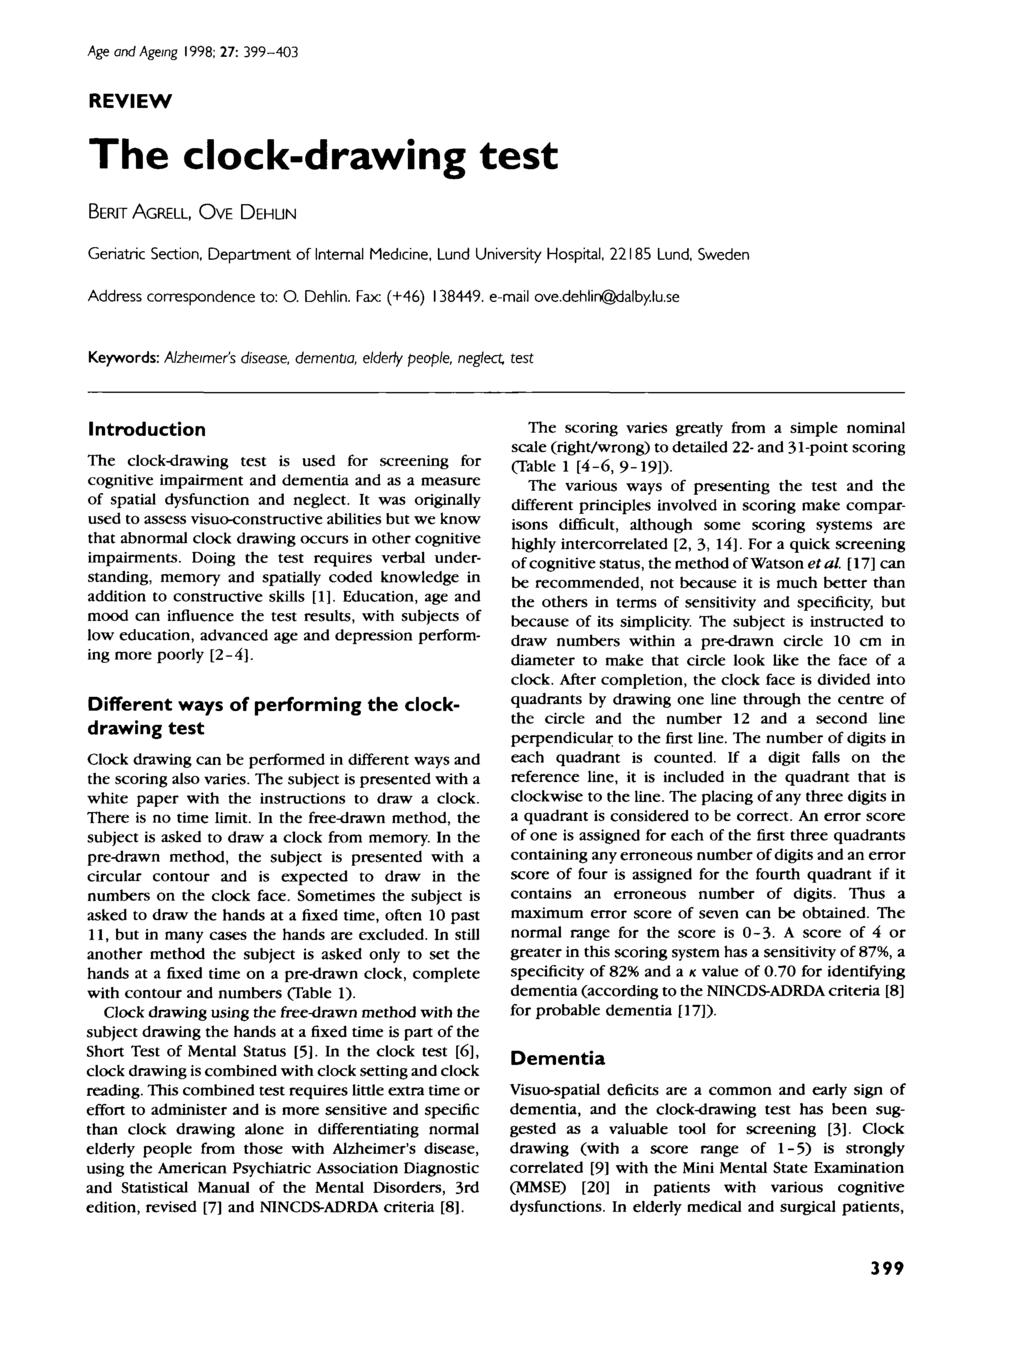 Age and Ageing 1998; 27: 399-403 REVIEW The clock-drawing test BERIT AGRELL, OVE DEHLJN Geriatric Section, Department of Internal Medicine, Lund University Hospital, 22185 Lund, Sweden Address